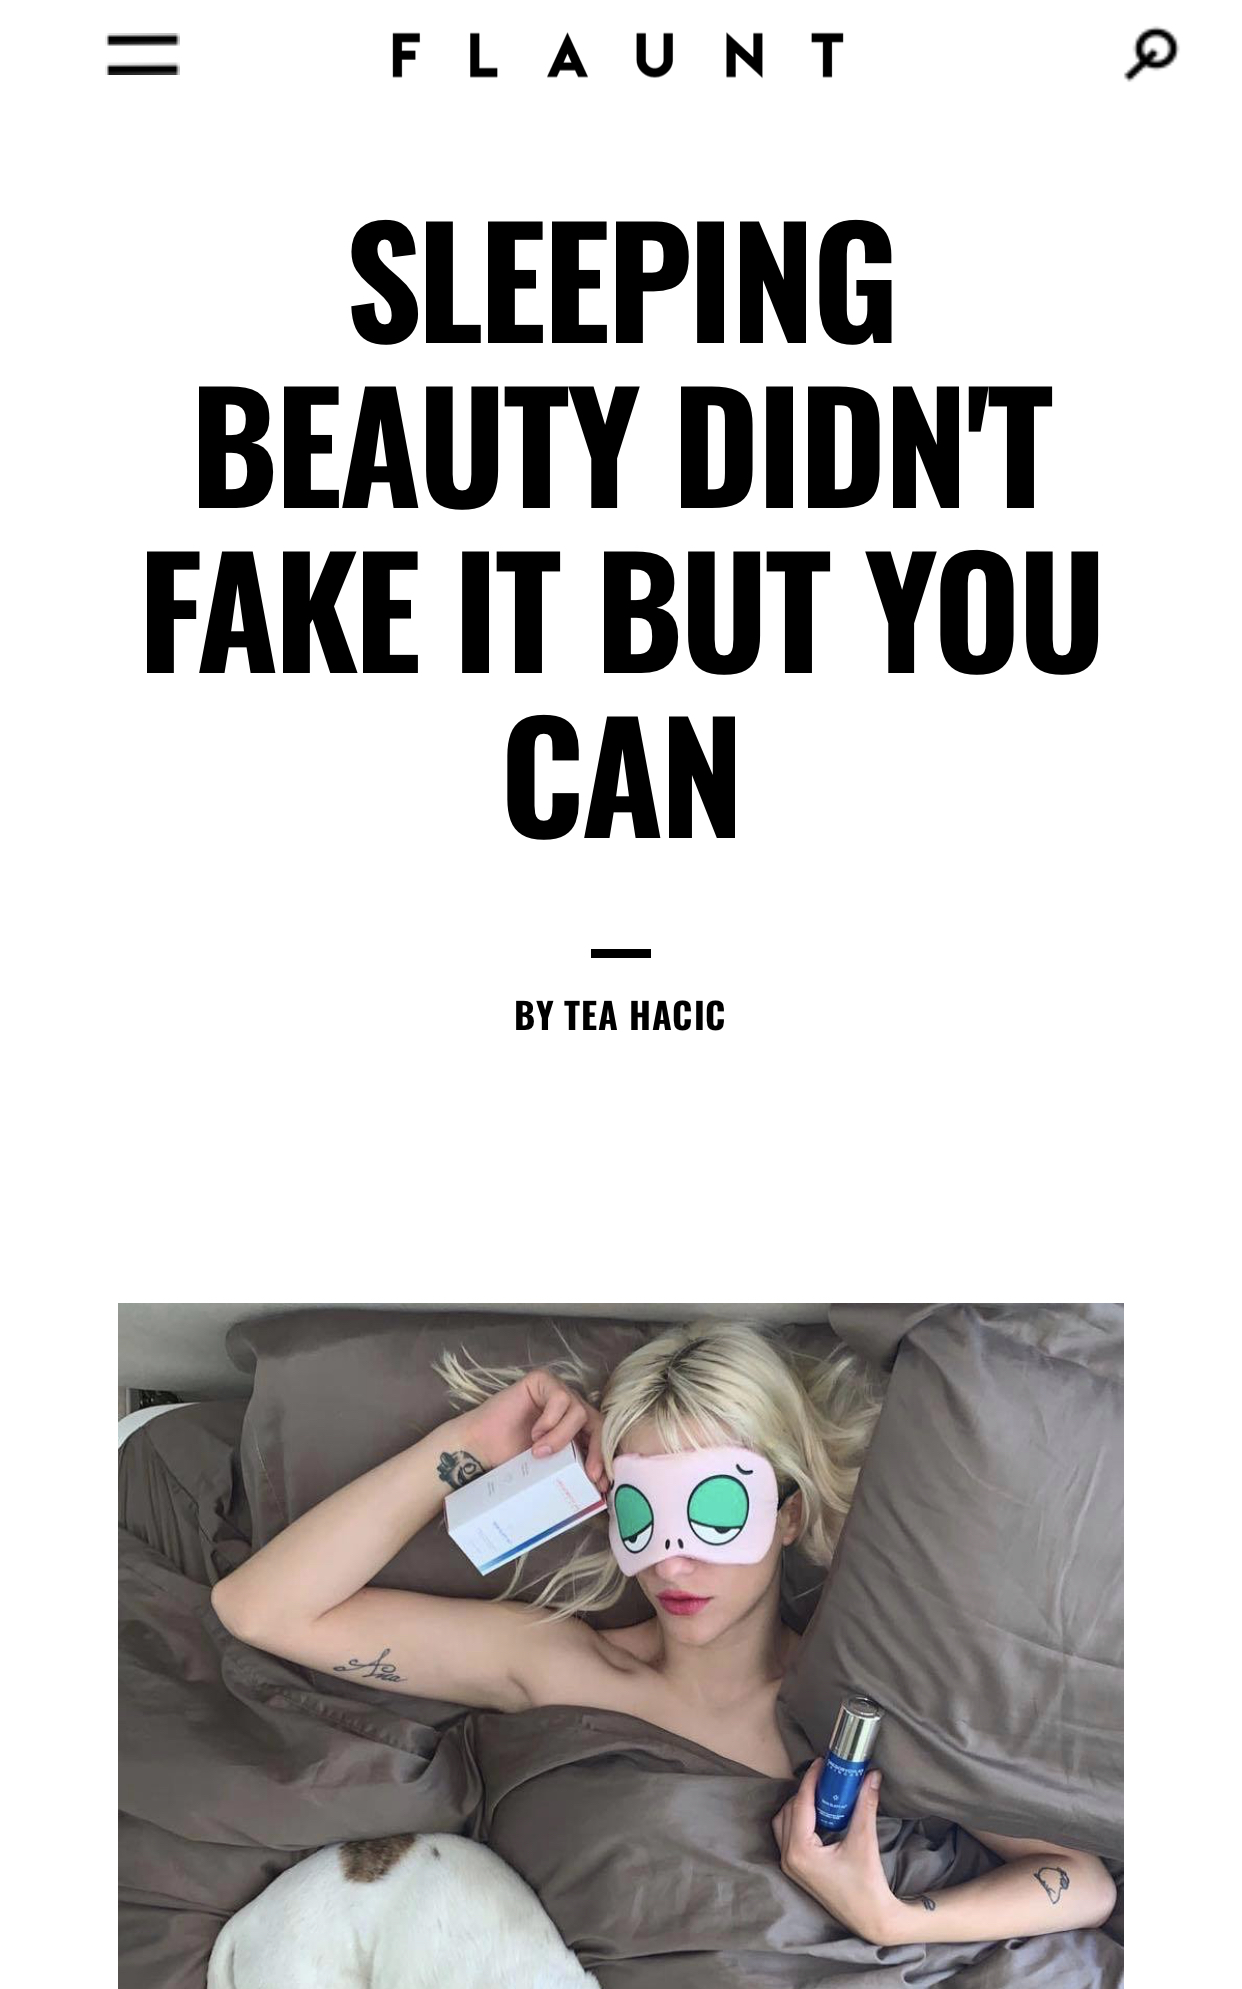 FLAUNT Magazine | Sleeping Beauty Didn't Fake It But You Can